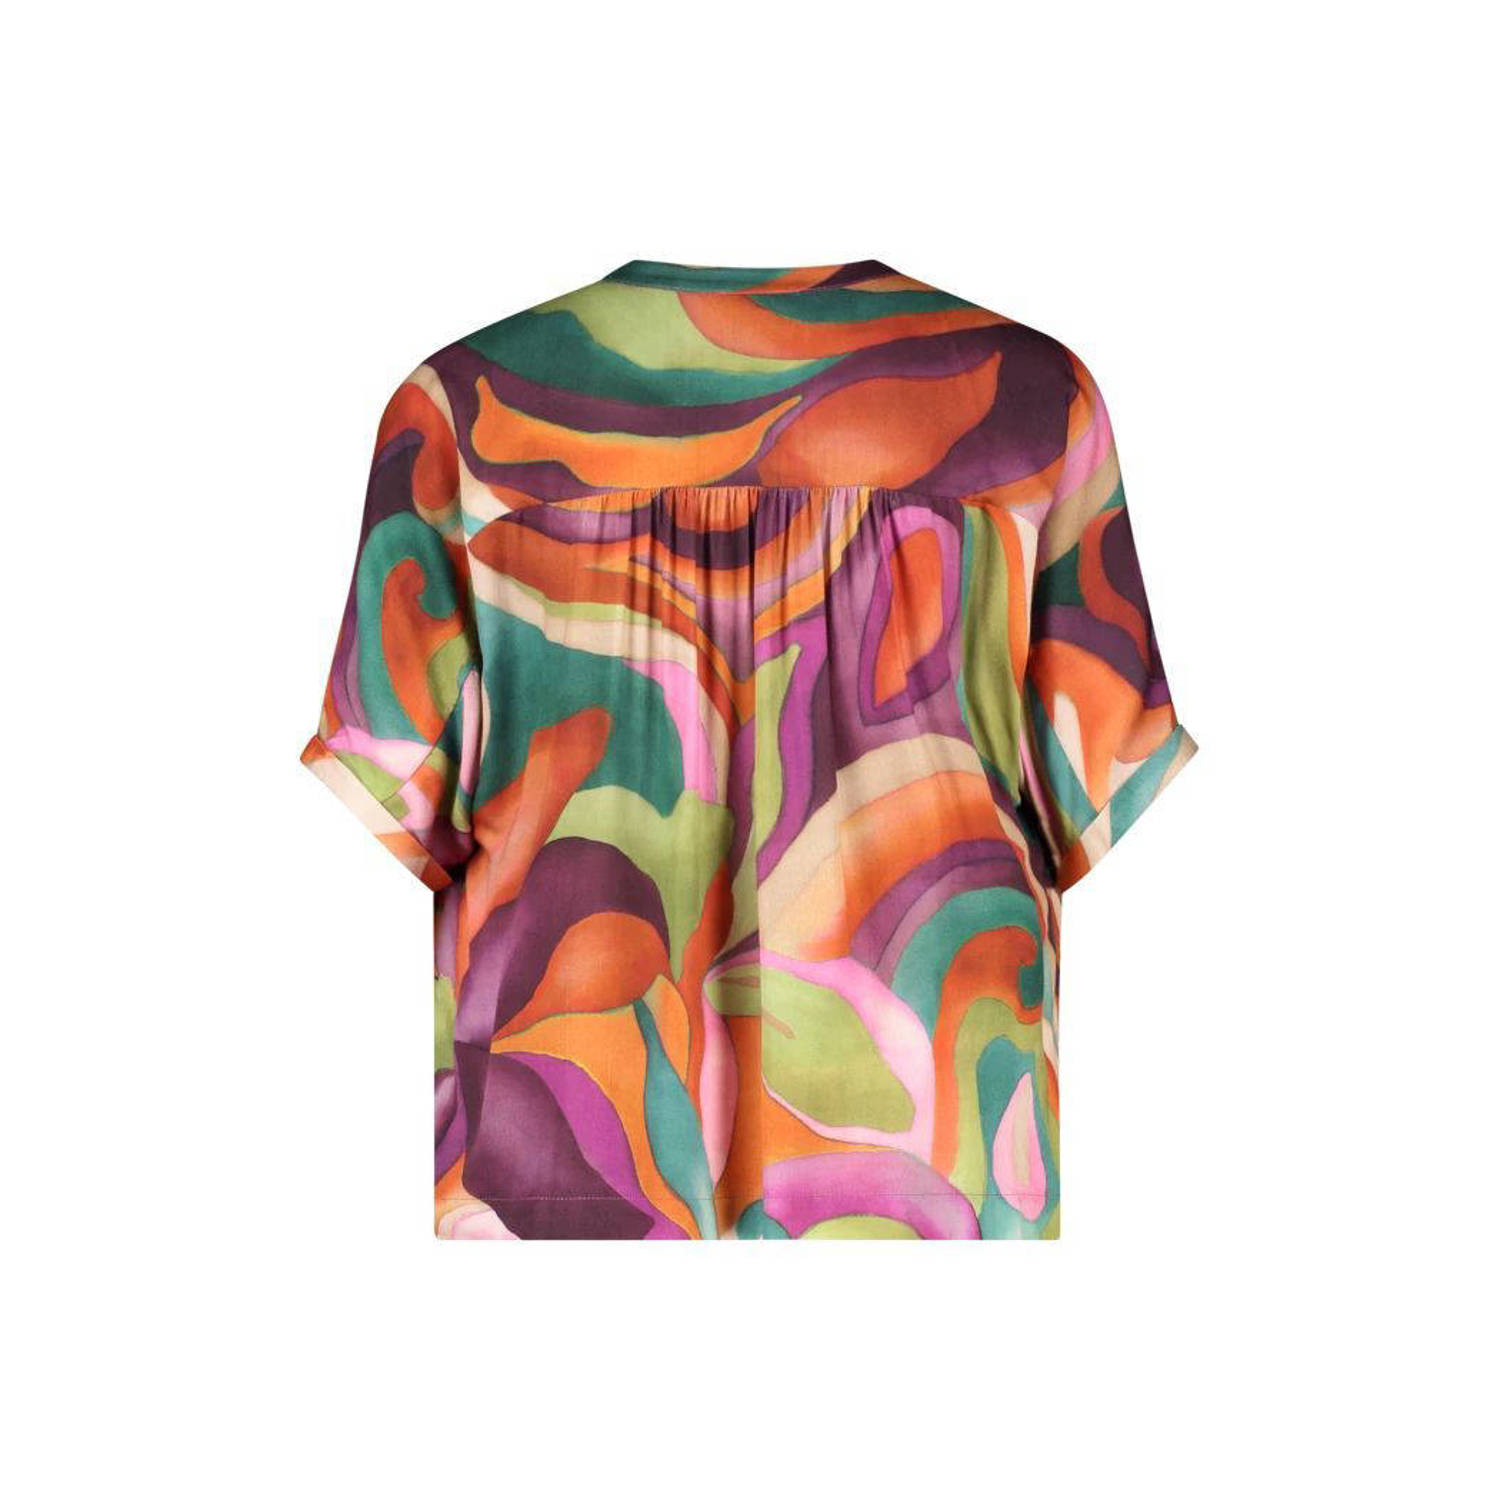 Claudia Sträter blousetop met all over print multi